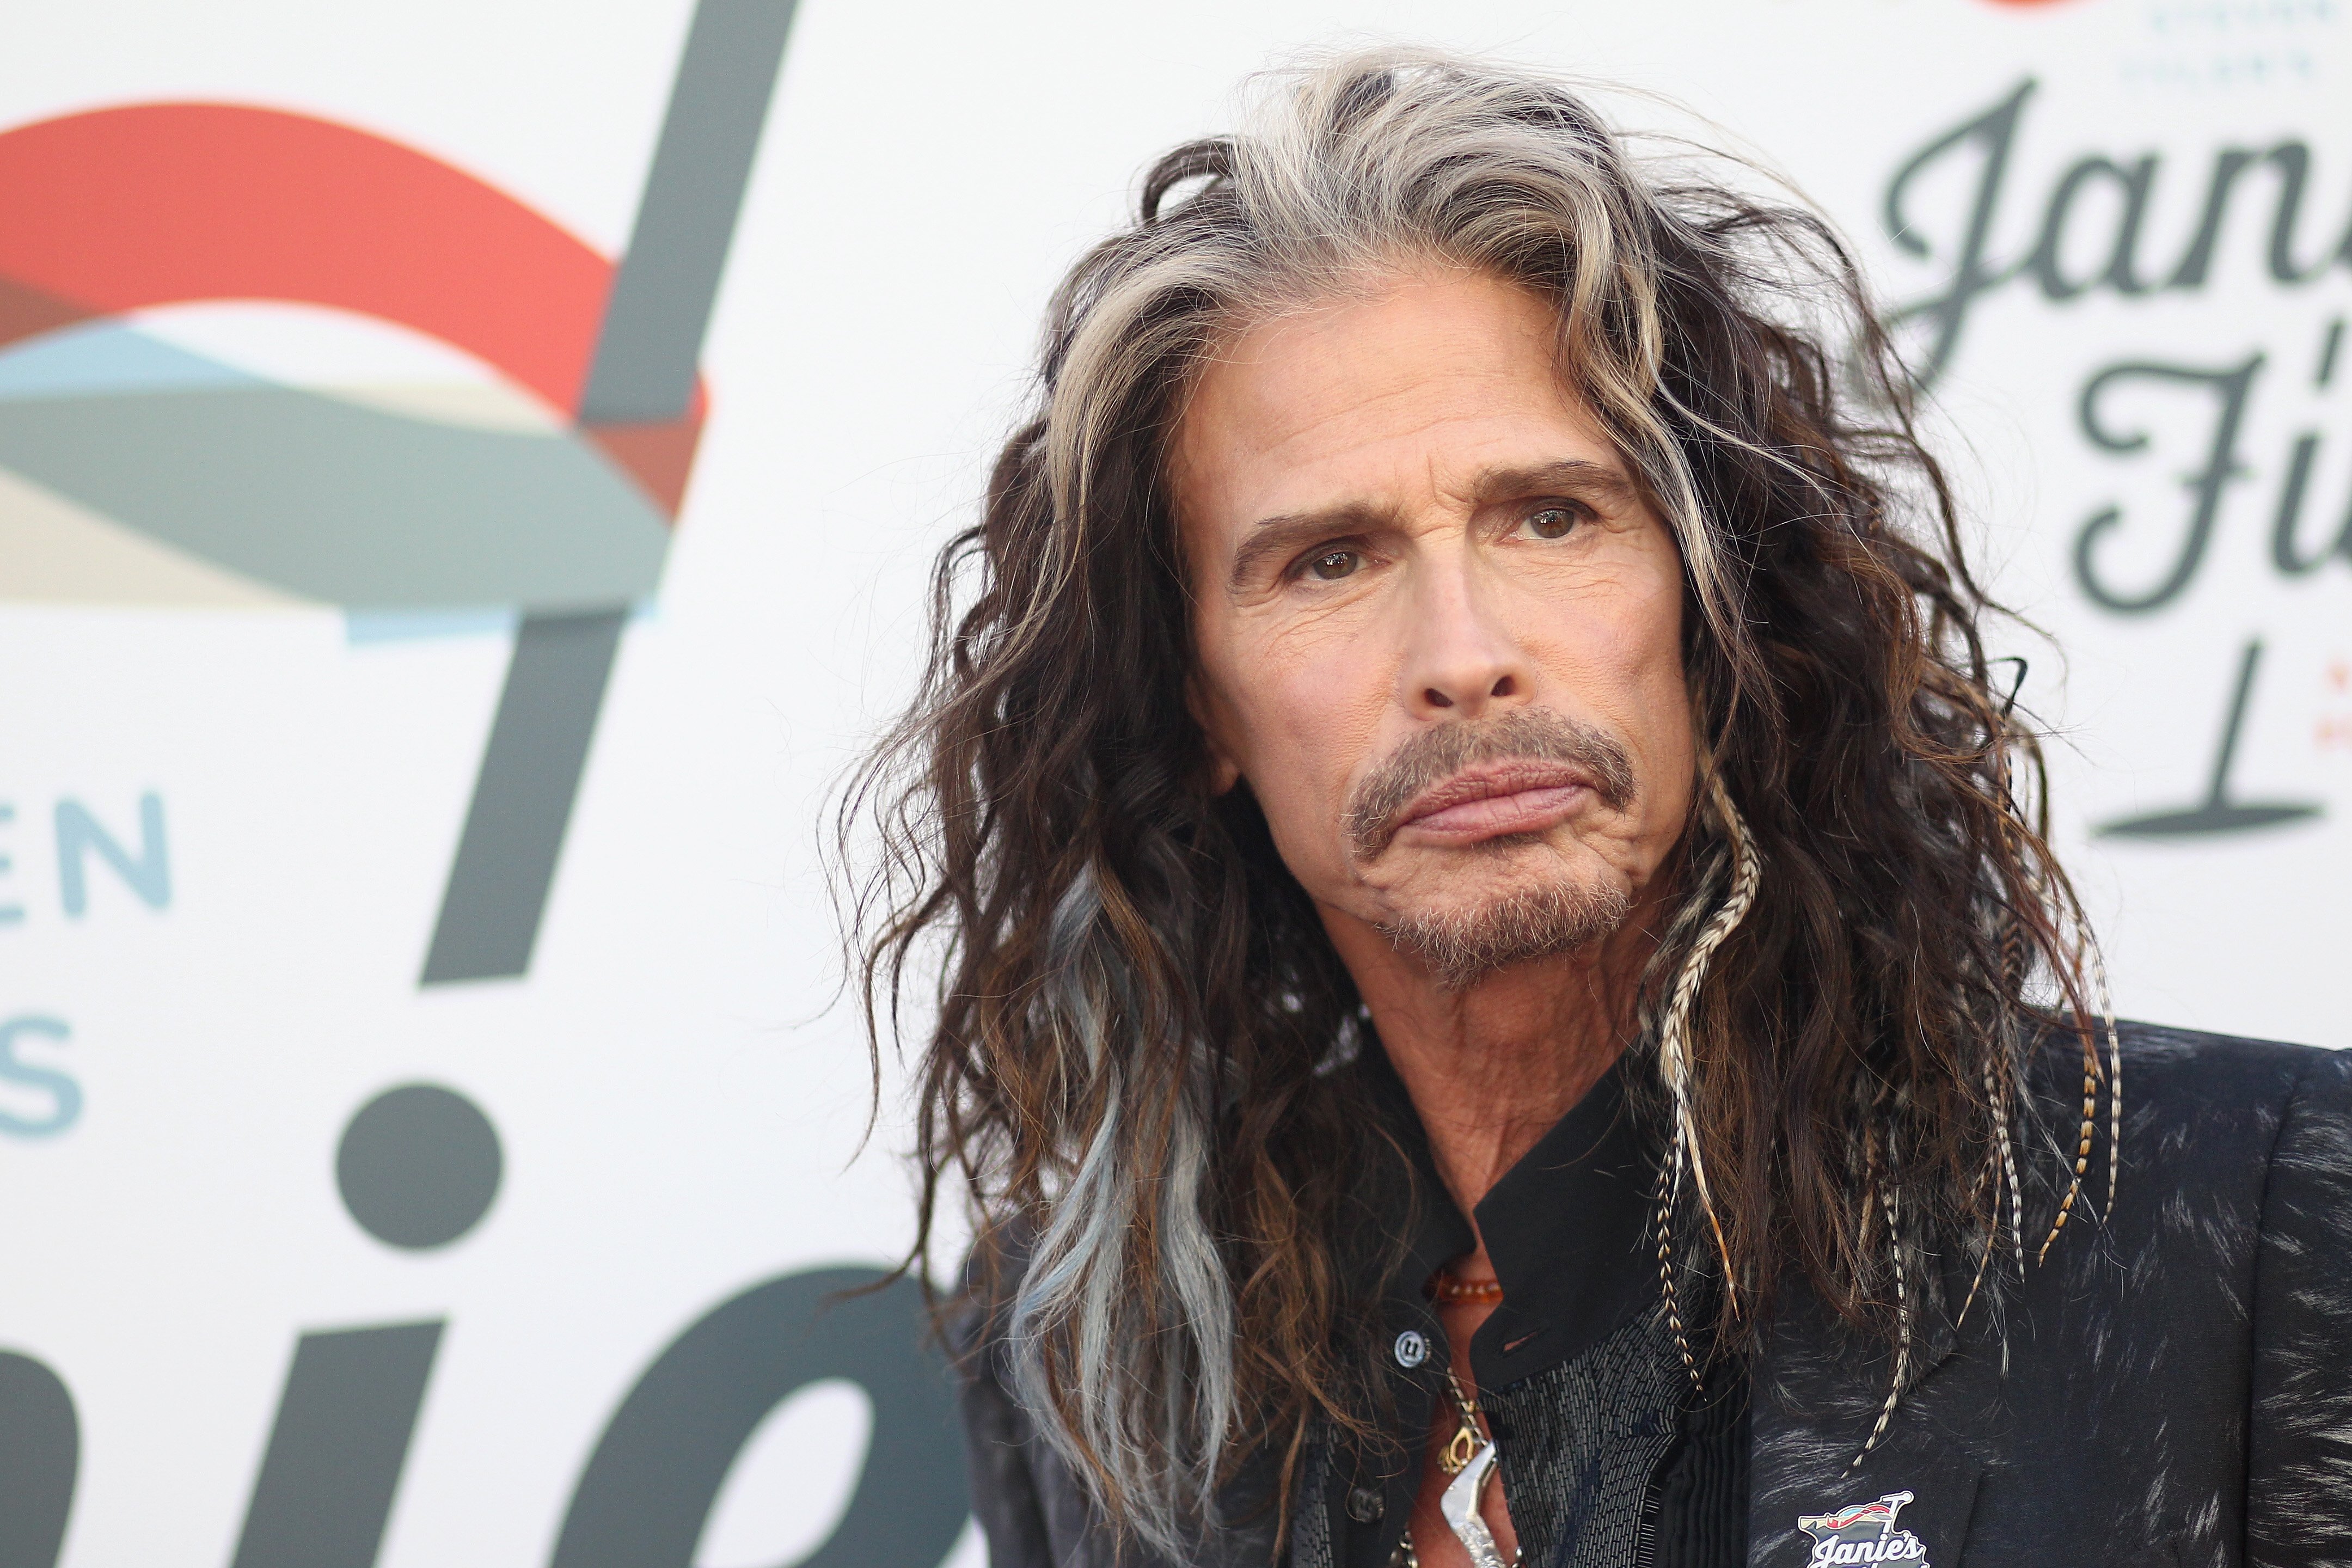 Steven Tyler at his Grammy Awards Viewing Party benefiting Janie's Fund | Photo: Getty Images